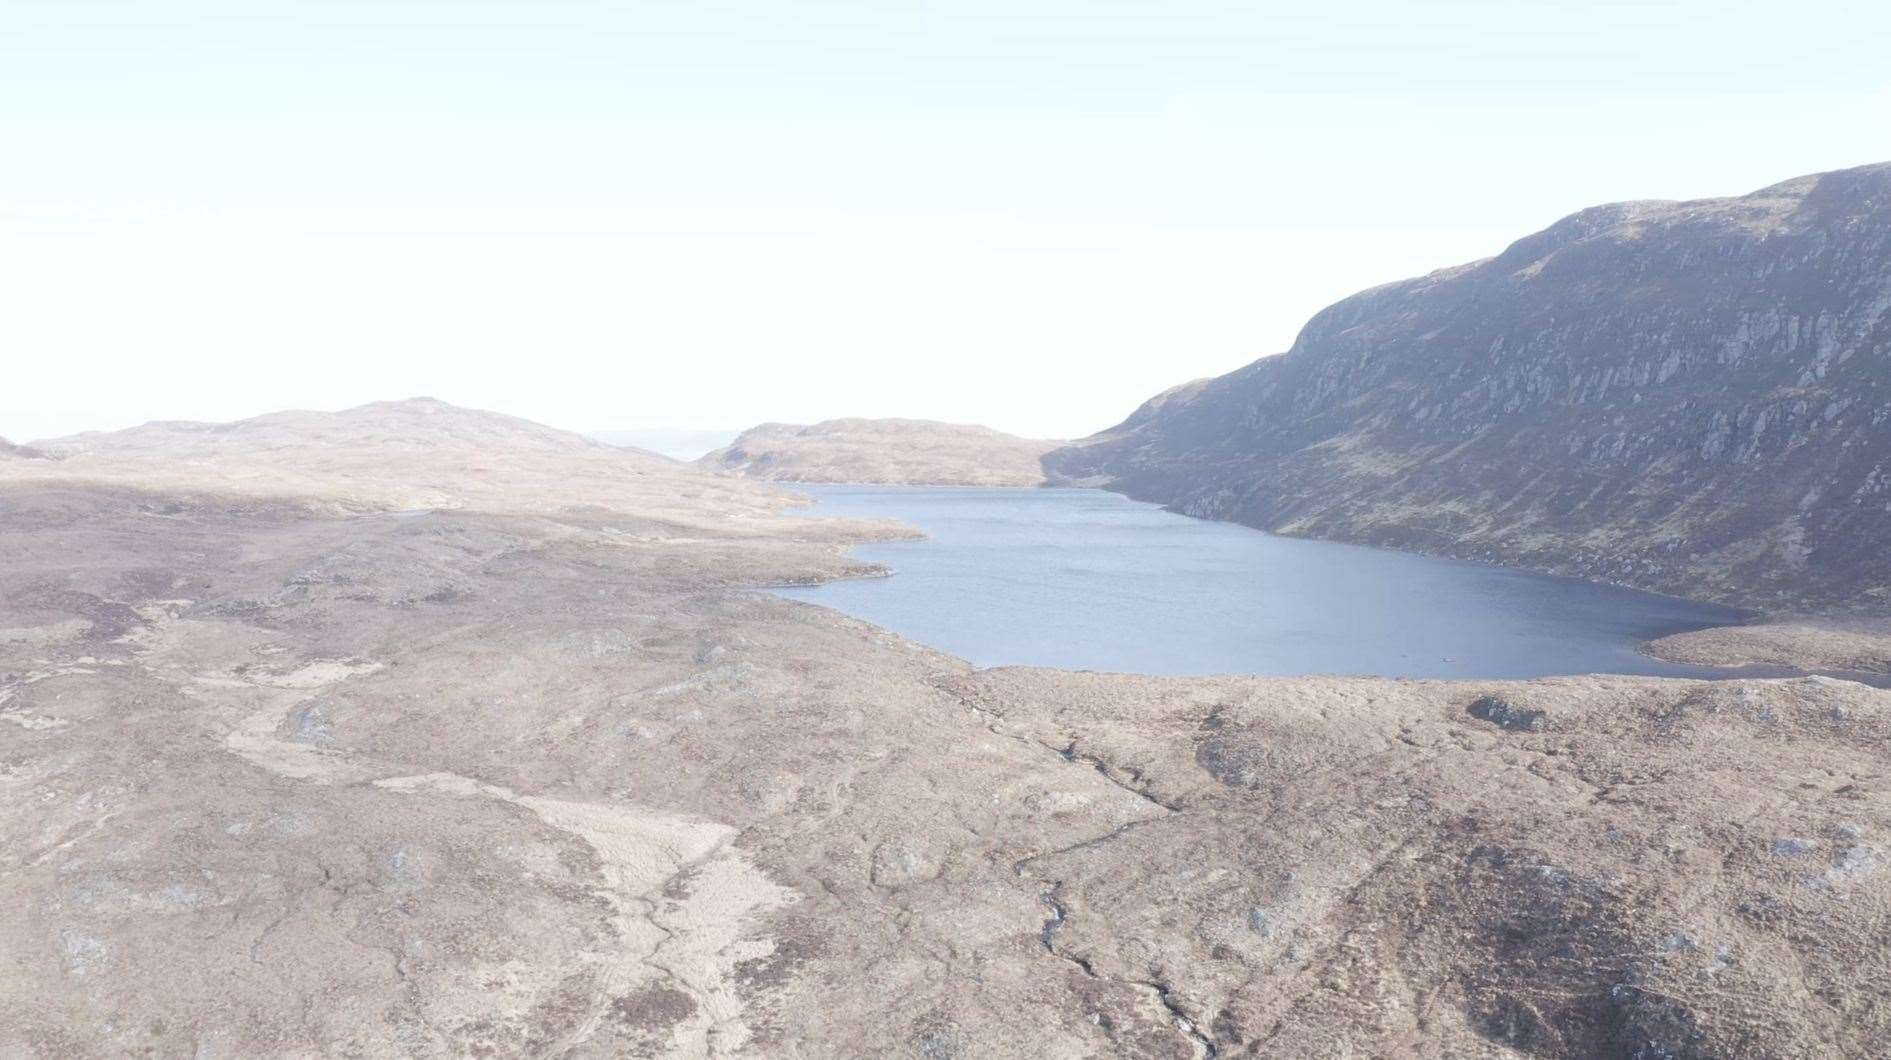 Loch Breac Dearga will provide one important part of the propopsed hydro project, coupled with Loch Ness.